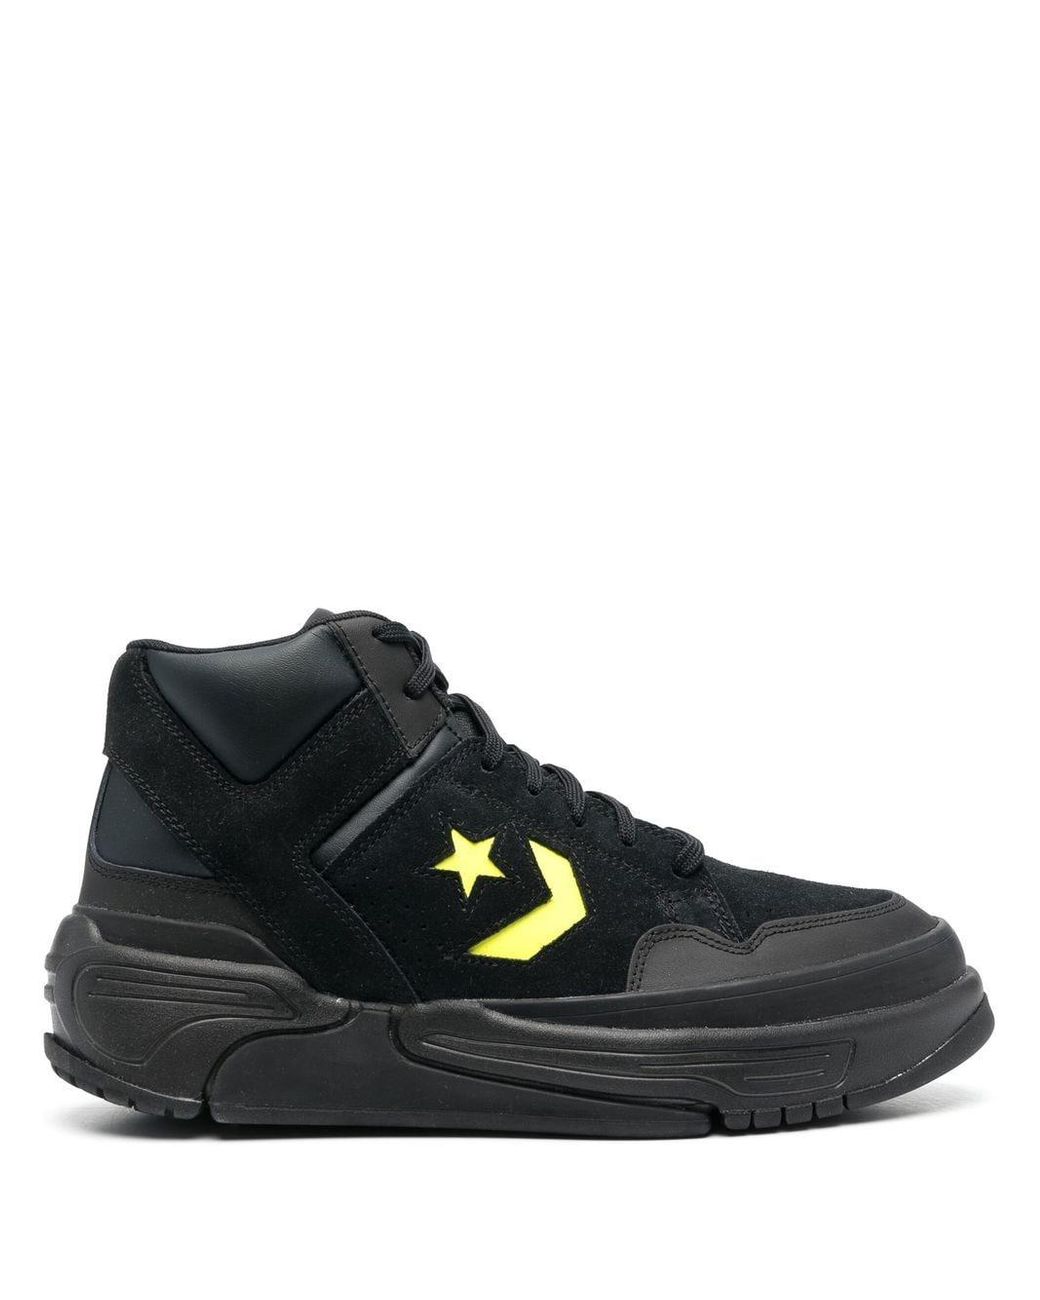 Converse Weapon Cx X Monster Clash Sneakers in Black | Lyst